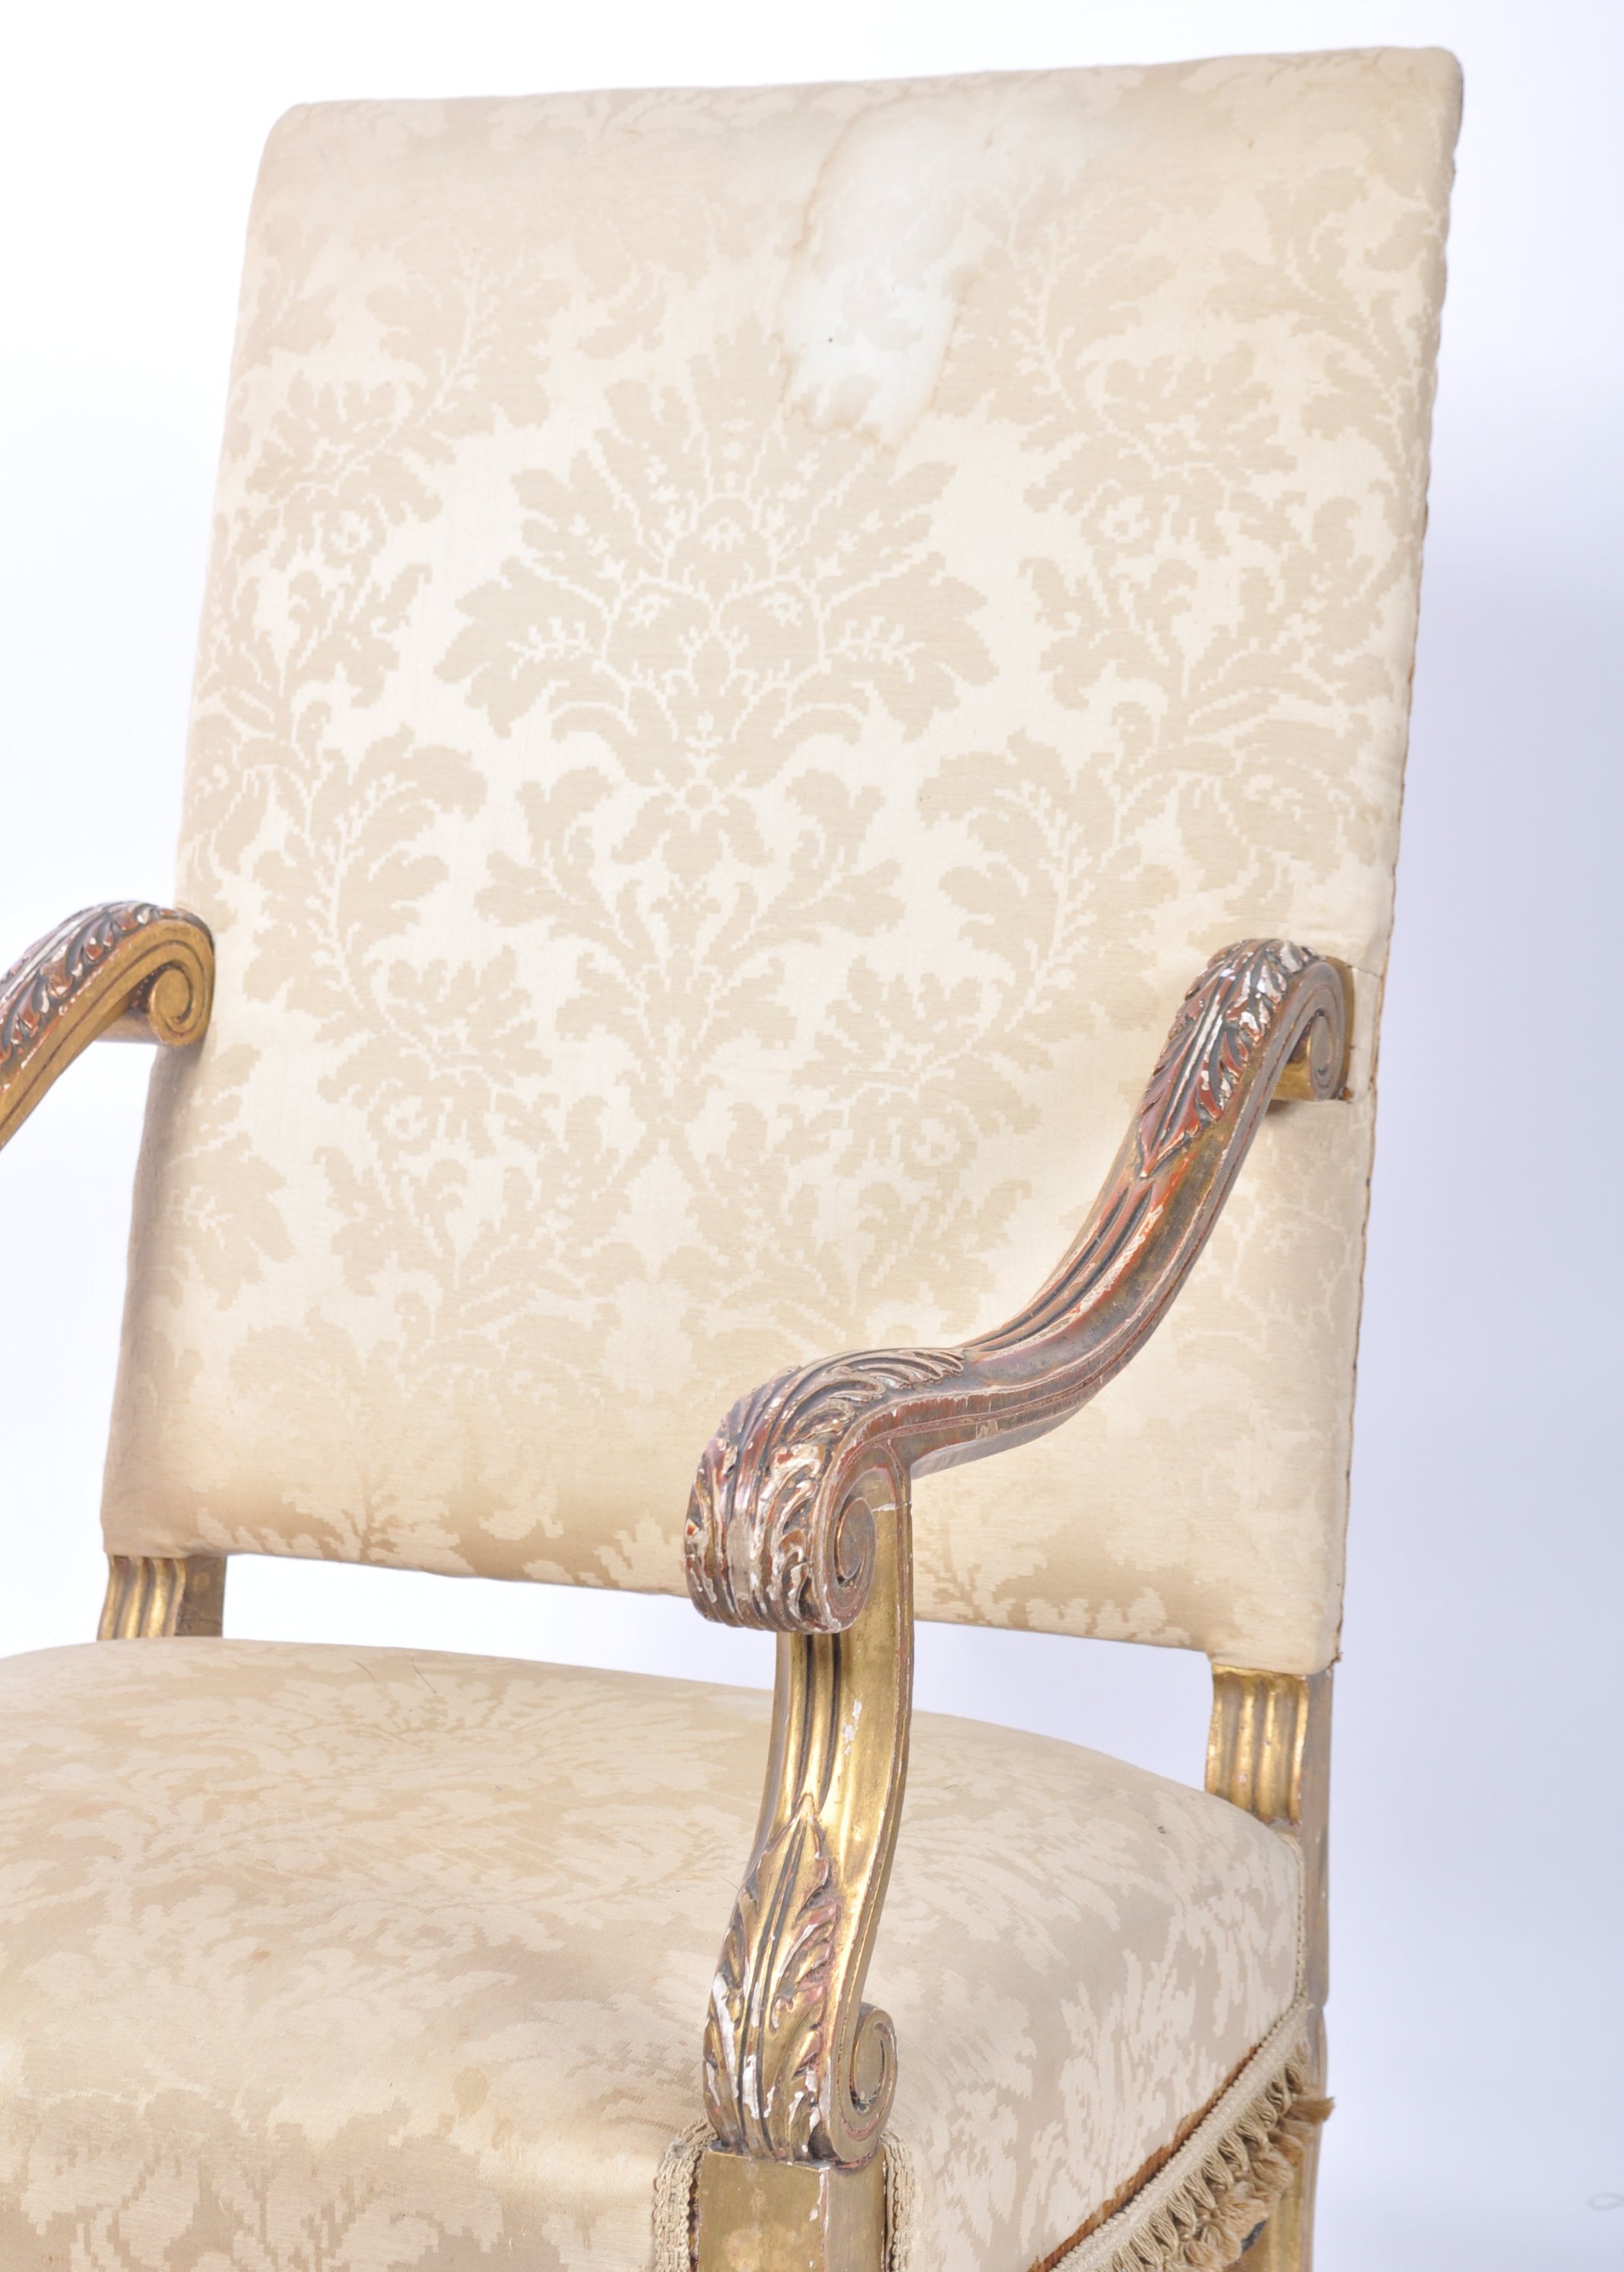 19TH CENTURY FRENCH HIGH BACK GILTWOOD FAUTEUIL AR - Image 3 of 6